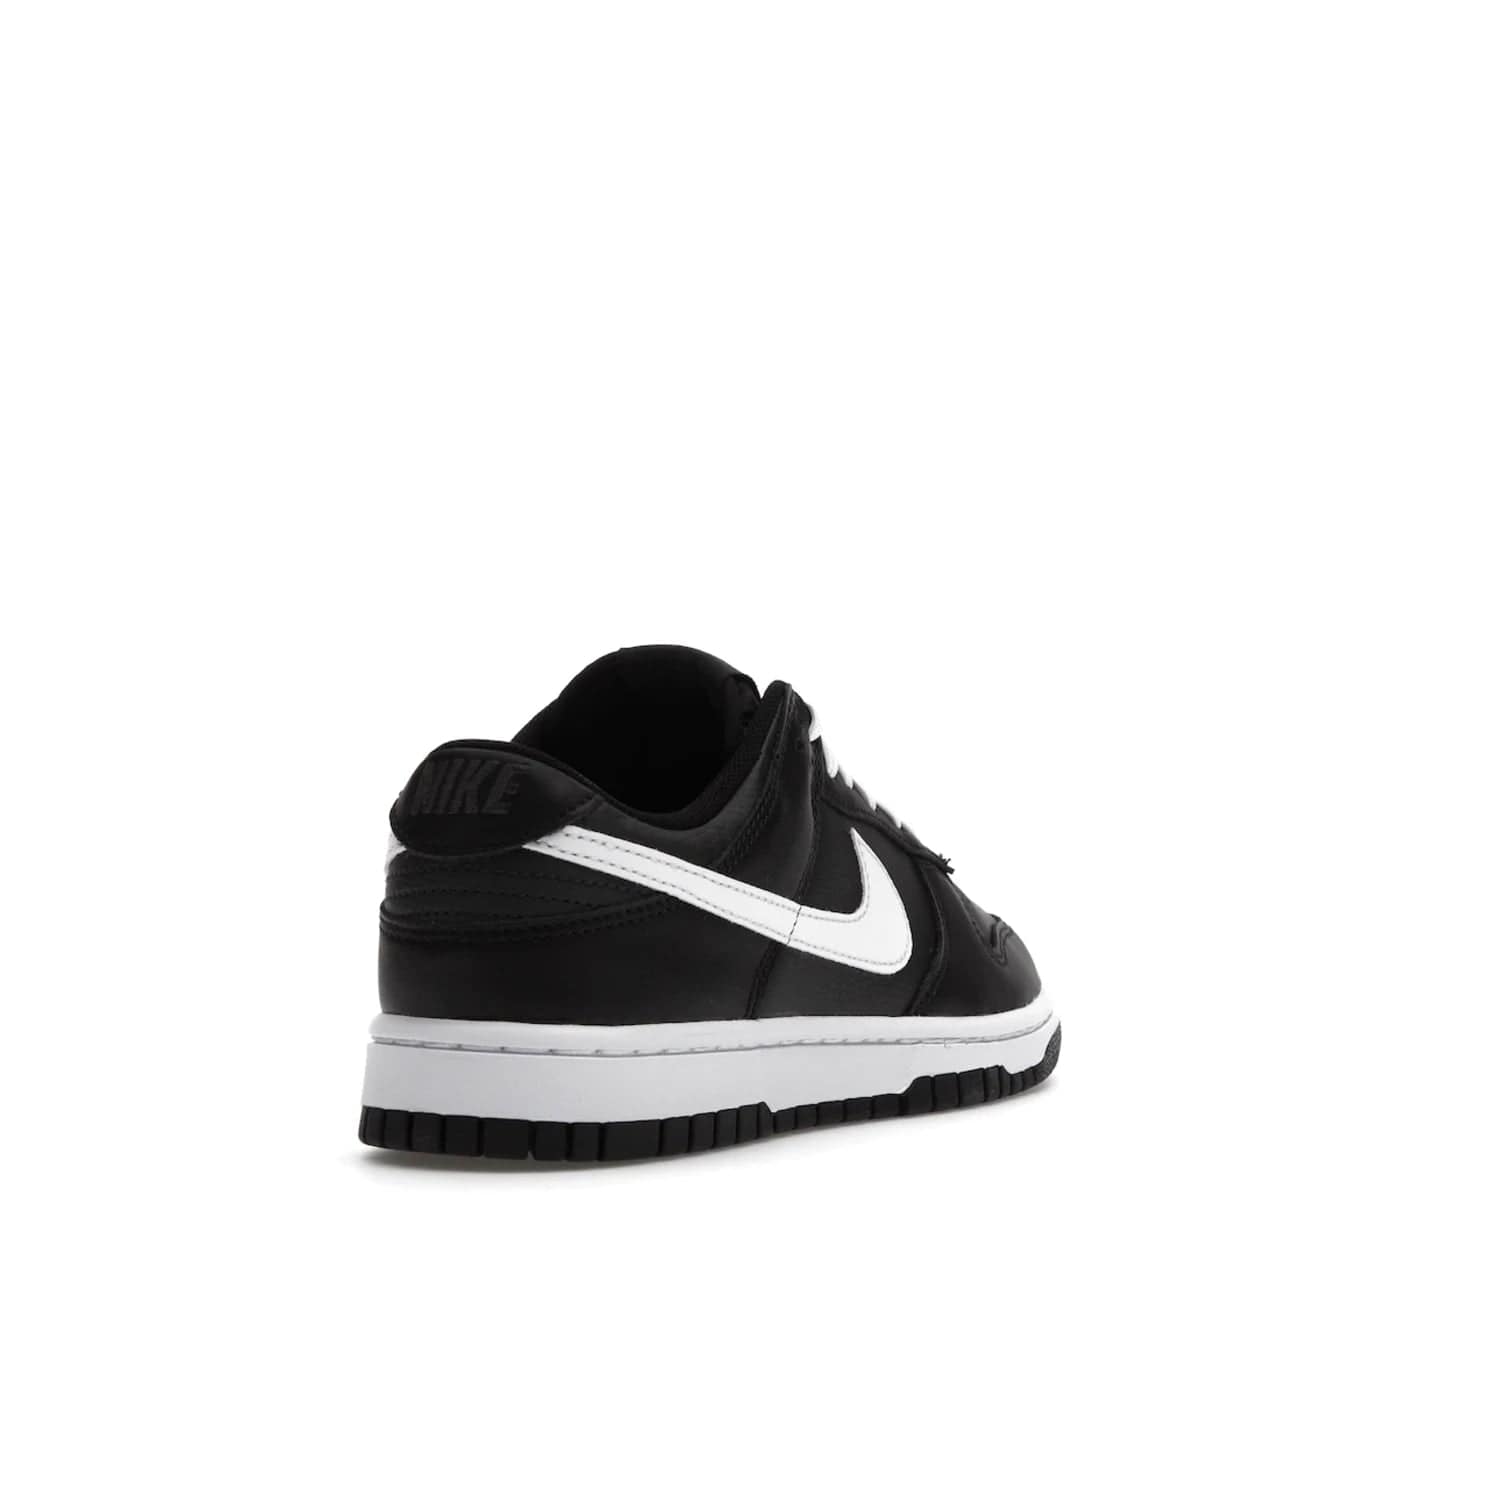 Nike Dunk Low Black White (2022) - Image 31 - Only at www.BallersClubKickz.com - A classic Nike Dunk Low in black and white. Its tumbled leather upper features leather overlays and white Nike Swooshes. The design also includes a woven tongue label and an EVA foam sole for cushioning and support. An effortlessly stylish and timeless look. The Nike Dunk Low Black White (2022) released in May. Step out in style.